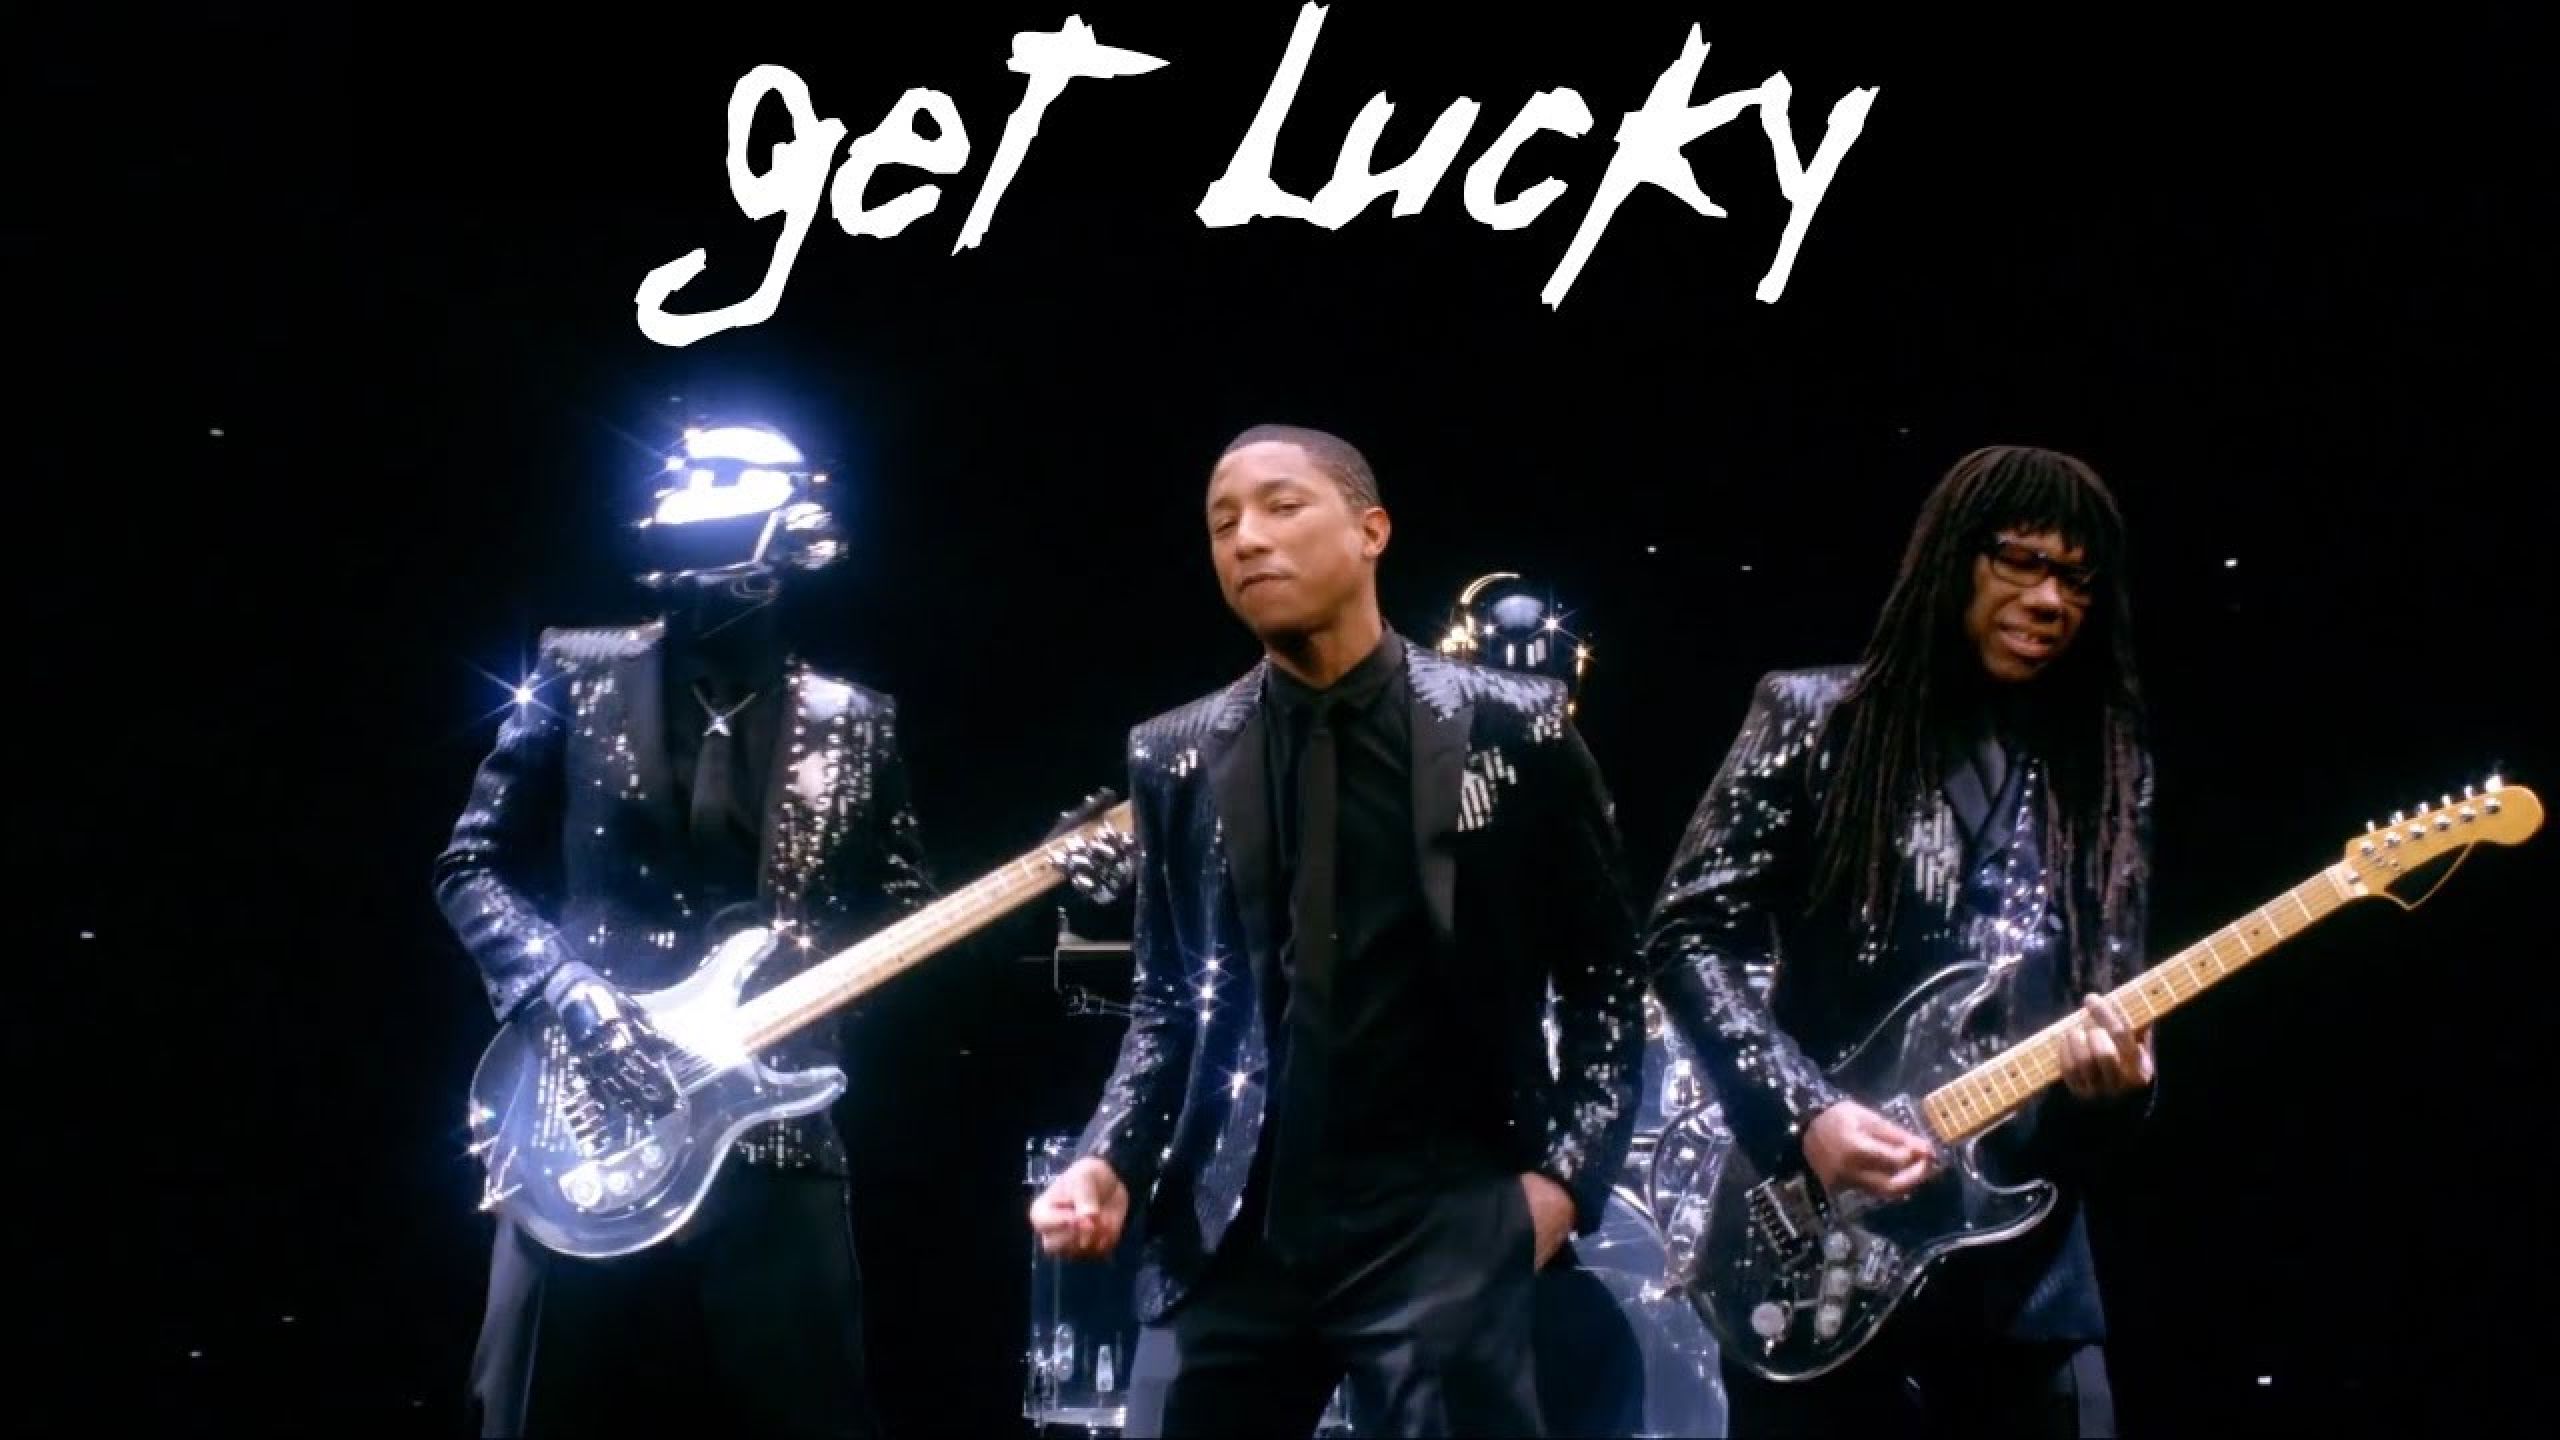 We come to far. Nile Rodgers Daft Punk. Daft Punk get Lucky. Pharrell Williams, Daft Punk, Nile Rodgers - get Lucky. Фаррелл Уильямс гет лаки.